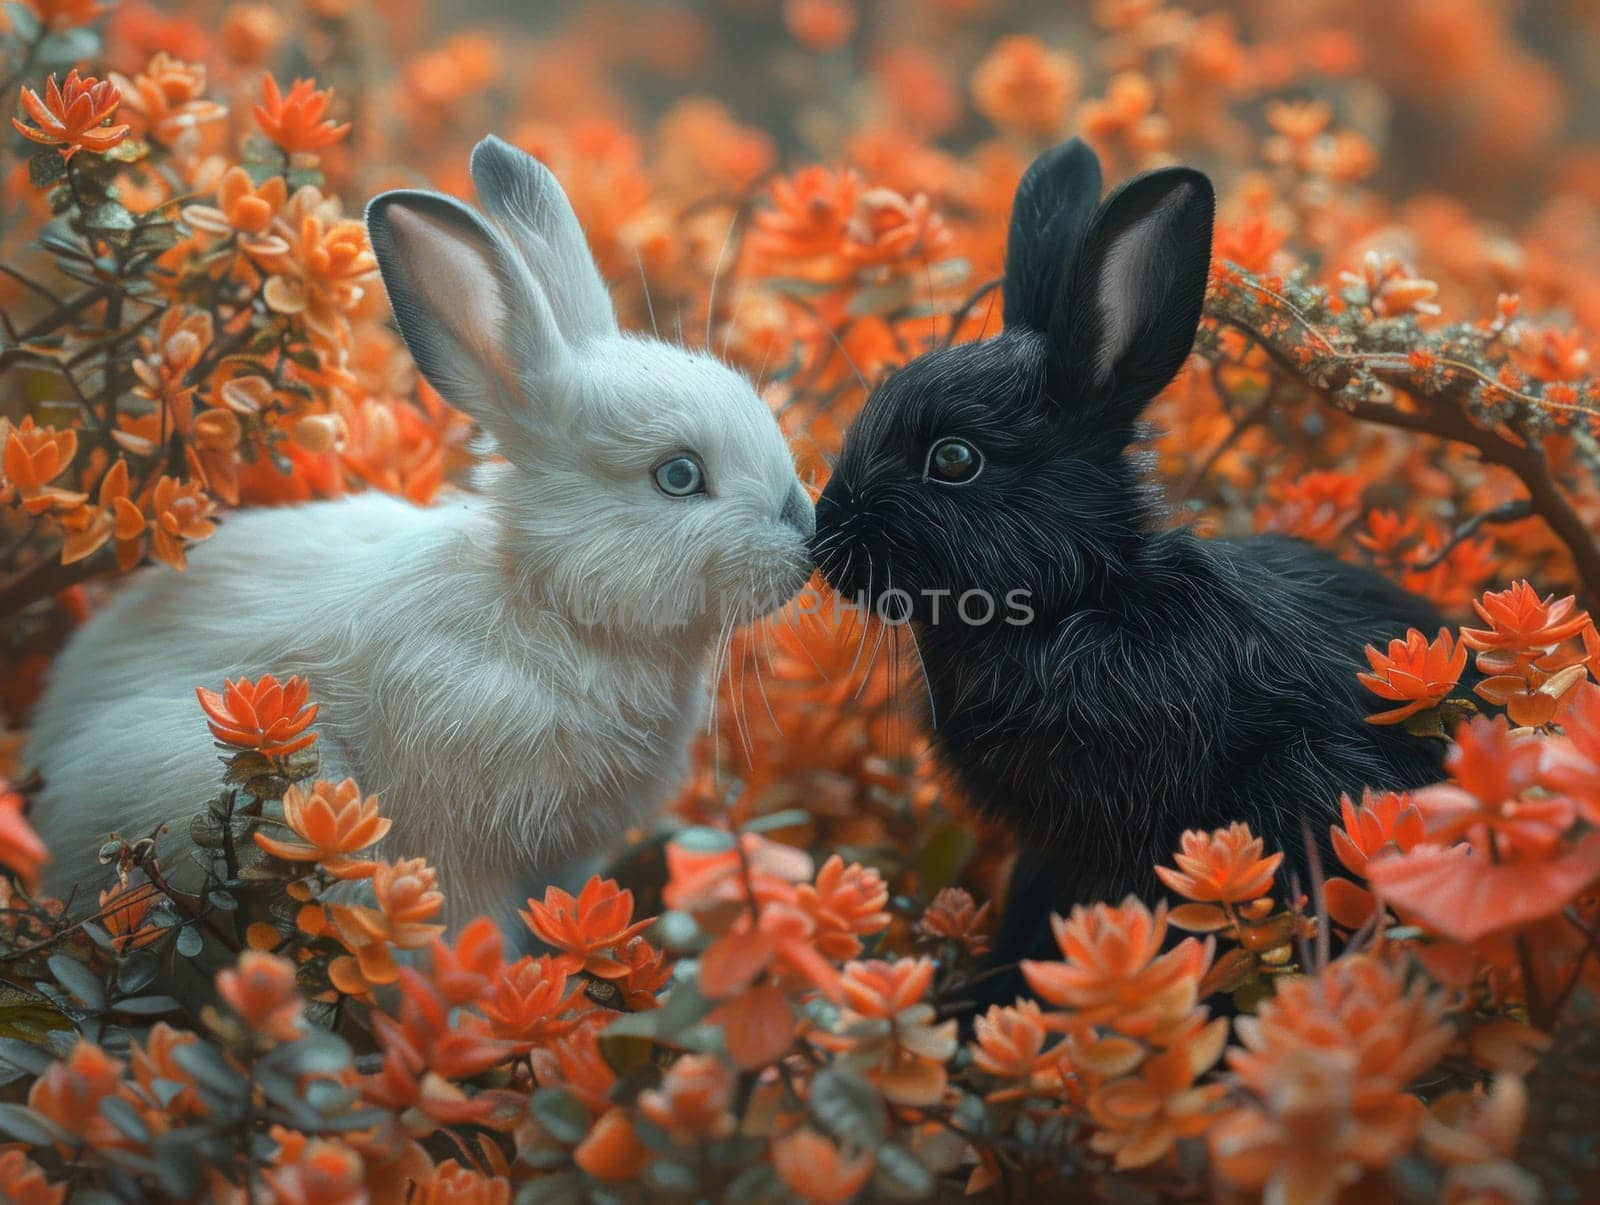 Two Black and White Rabbits Among Orange Flowers by but_photo